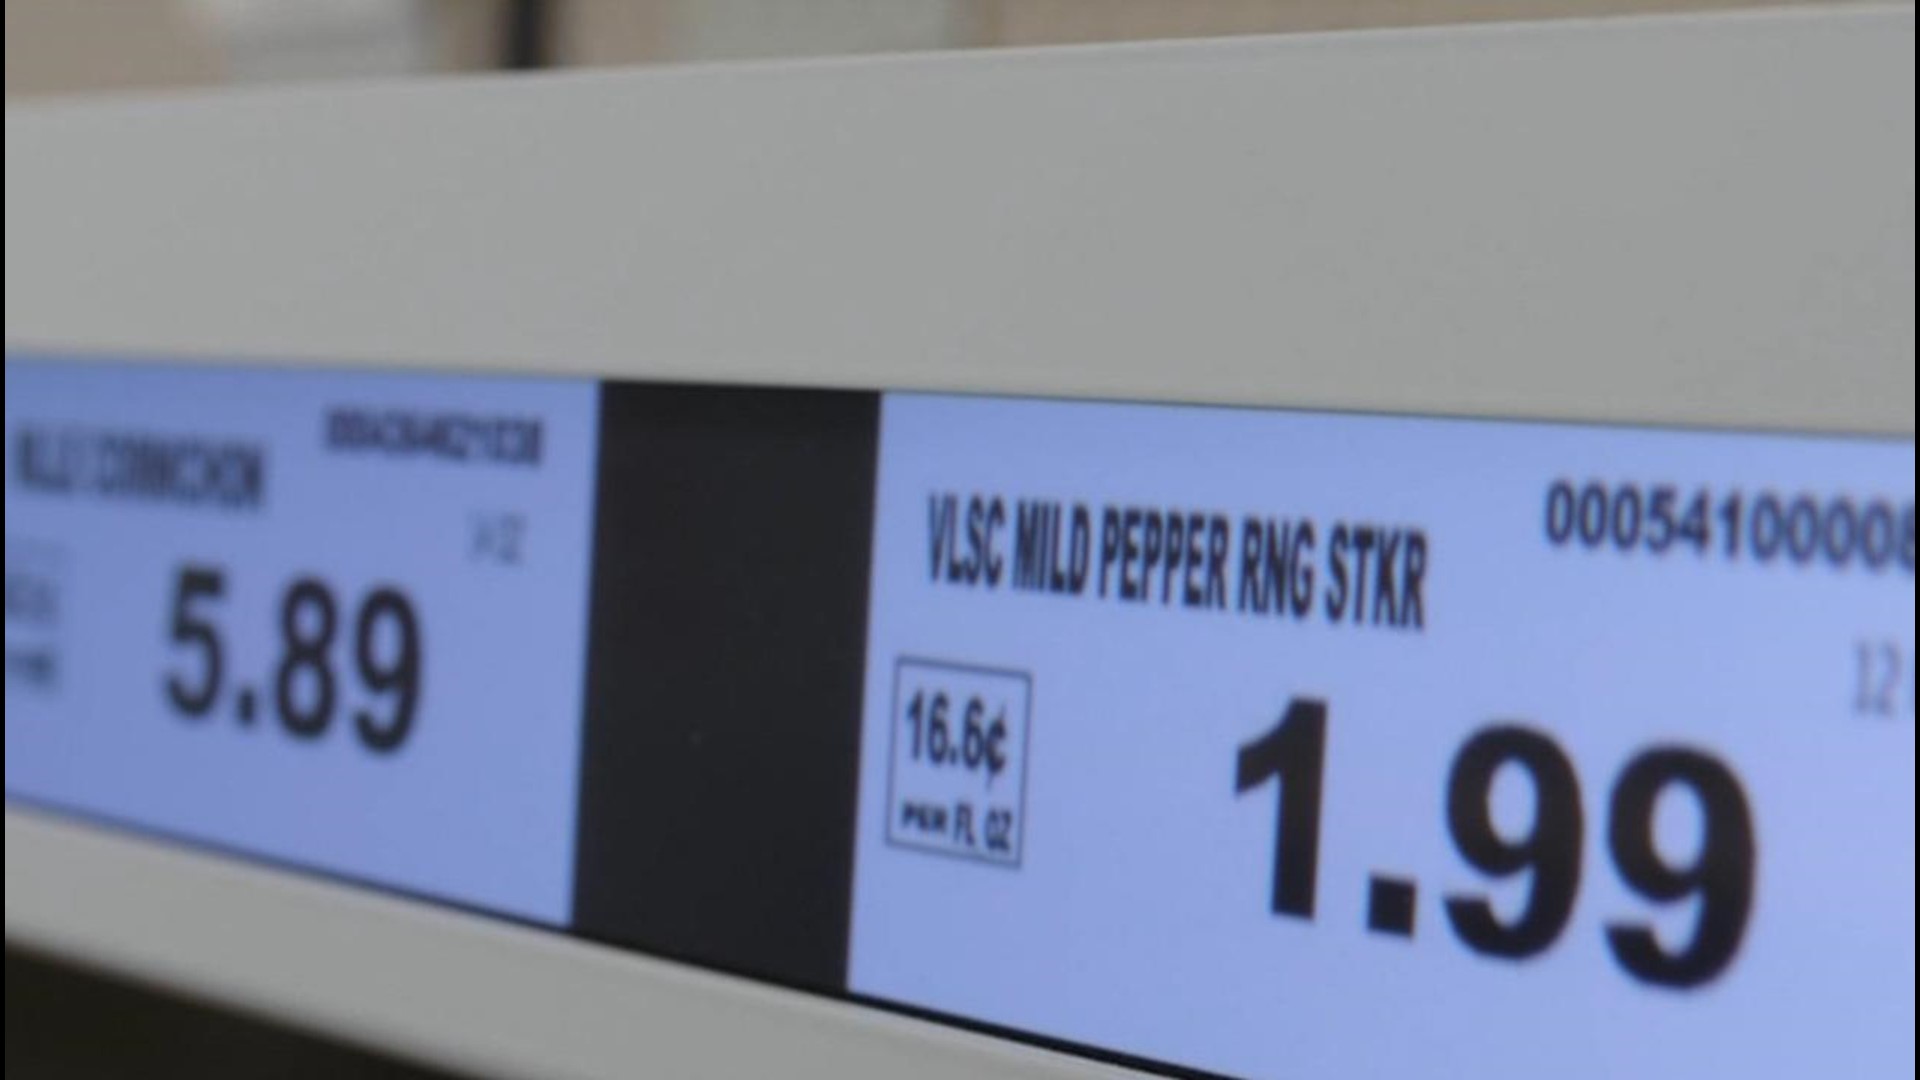 The Future Of Shopping: Kroger Tests Digital Price Tags